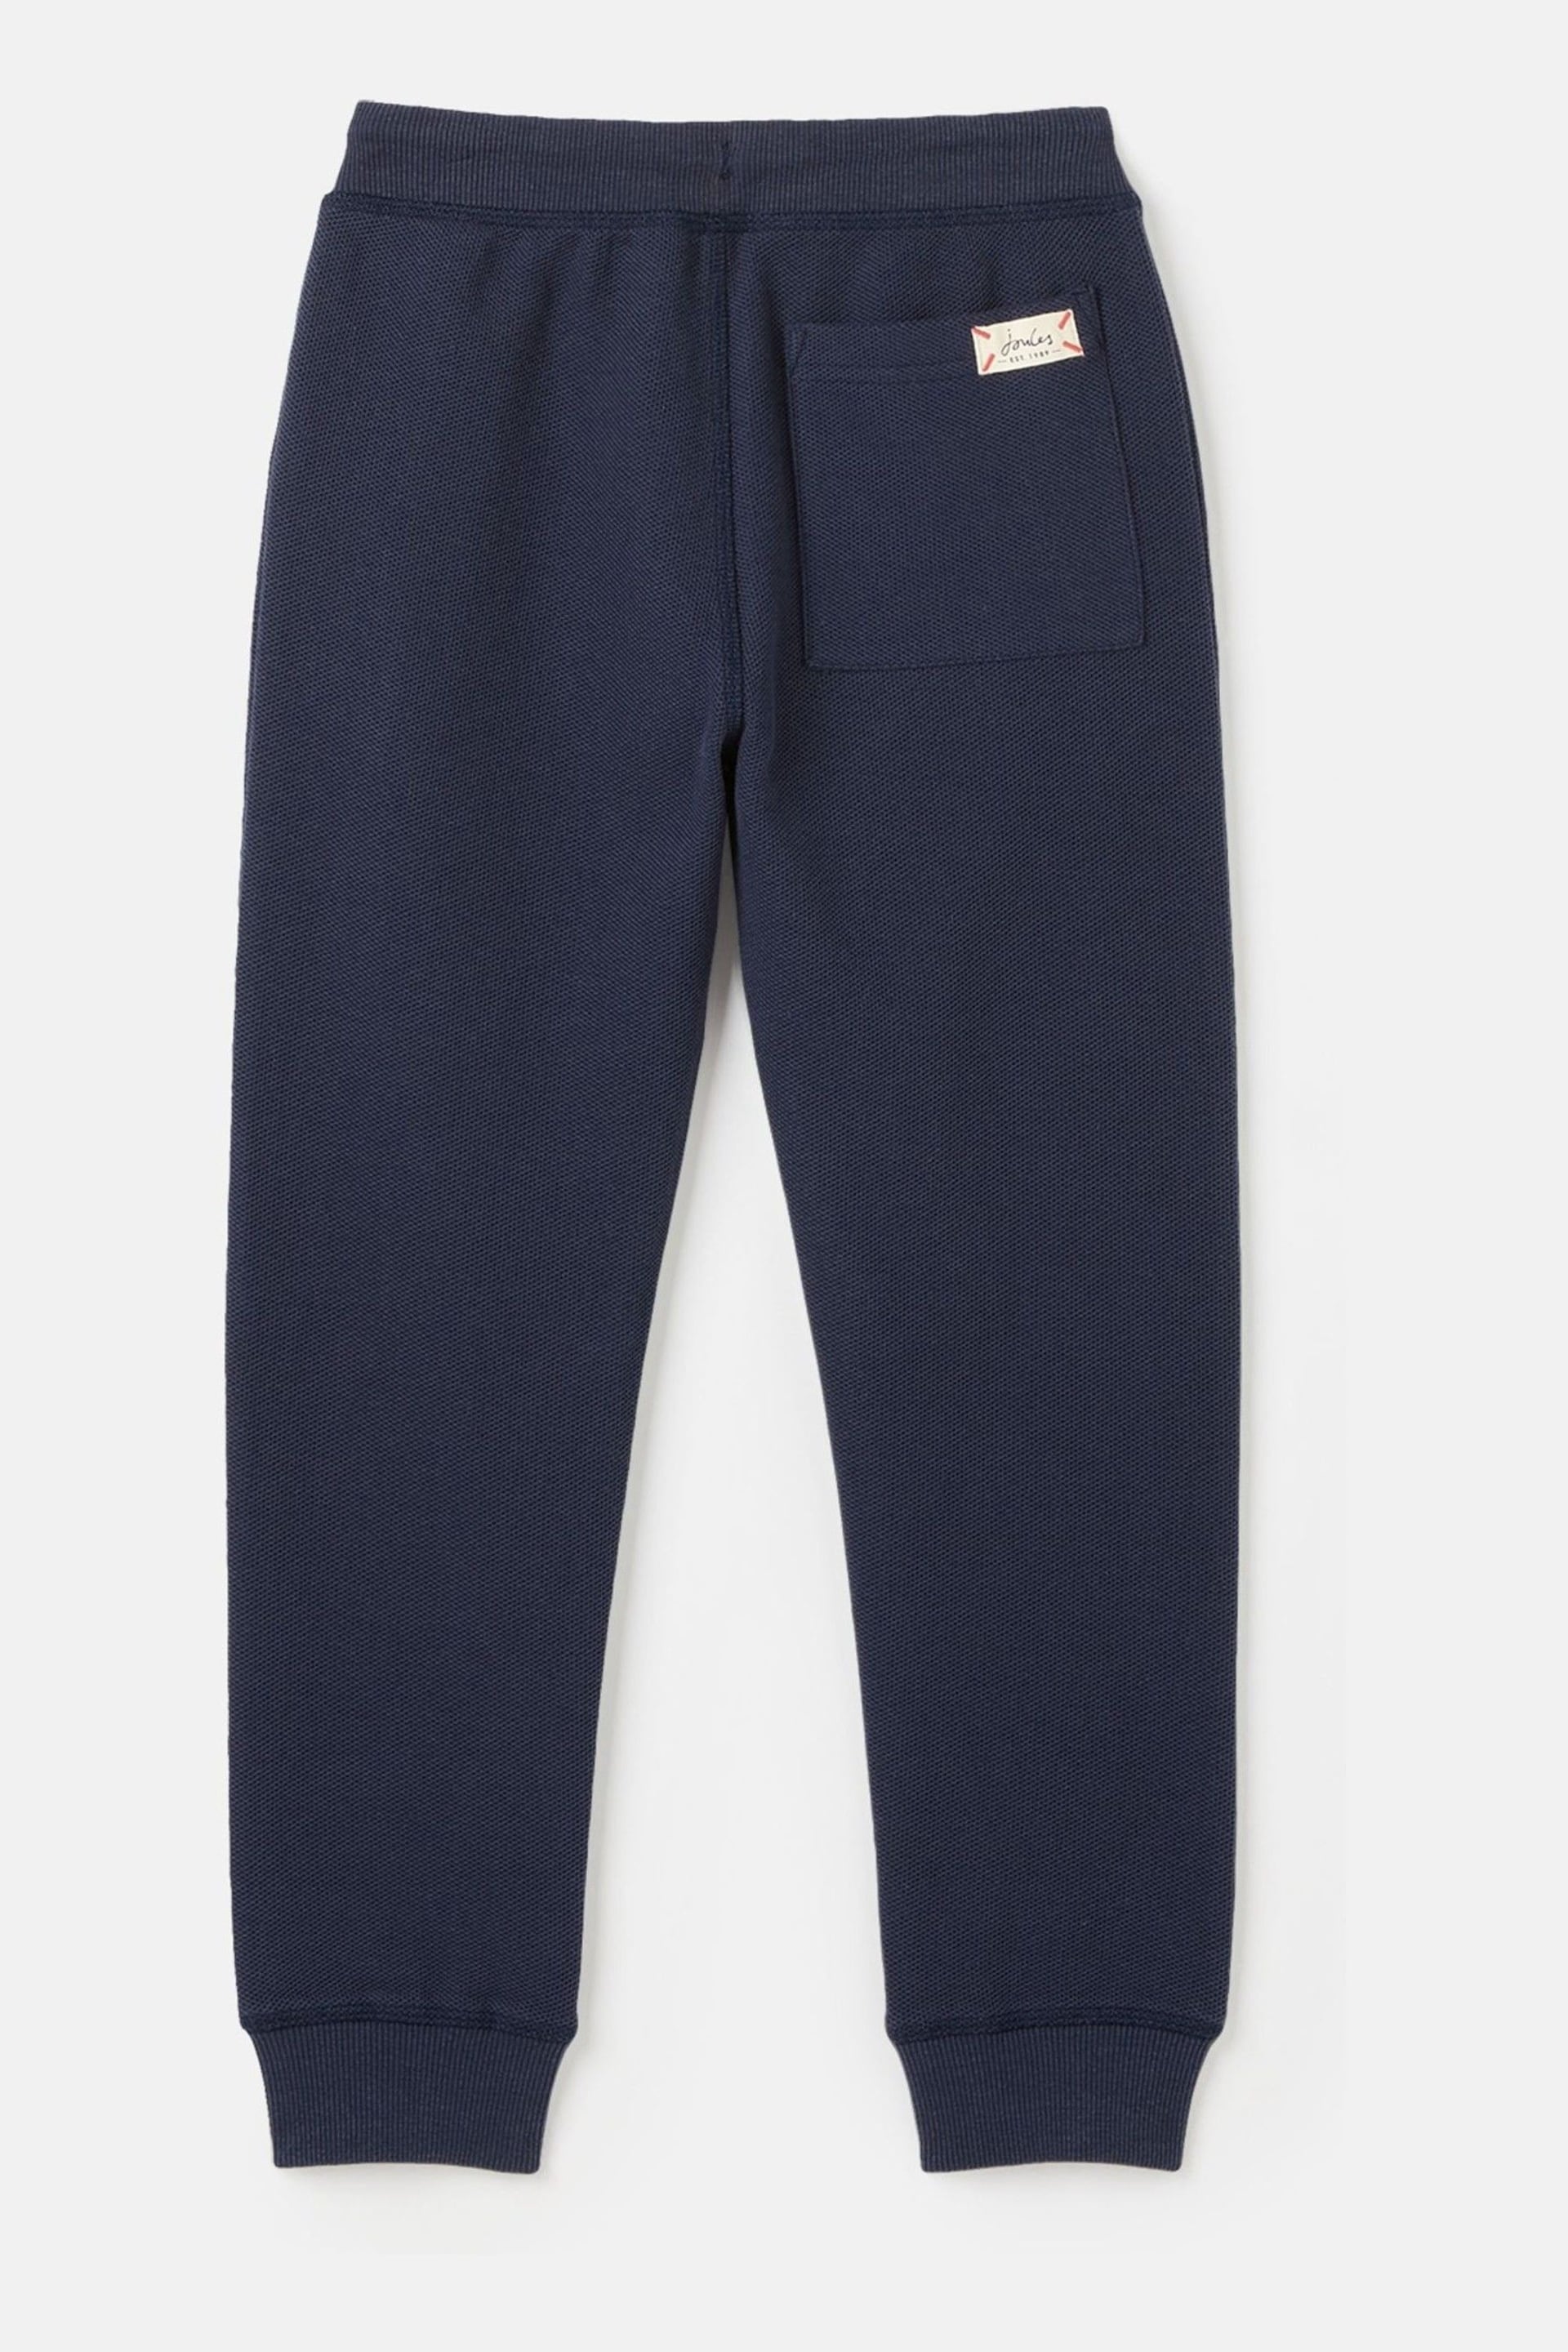 Joules Sid Navy Blue Cotton Joggers - Image 2 of 6